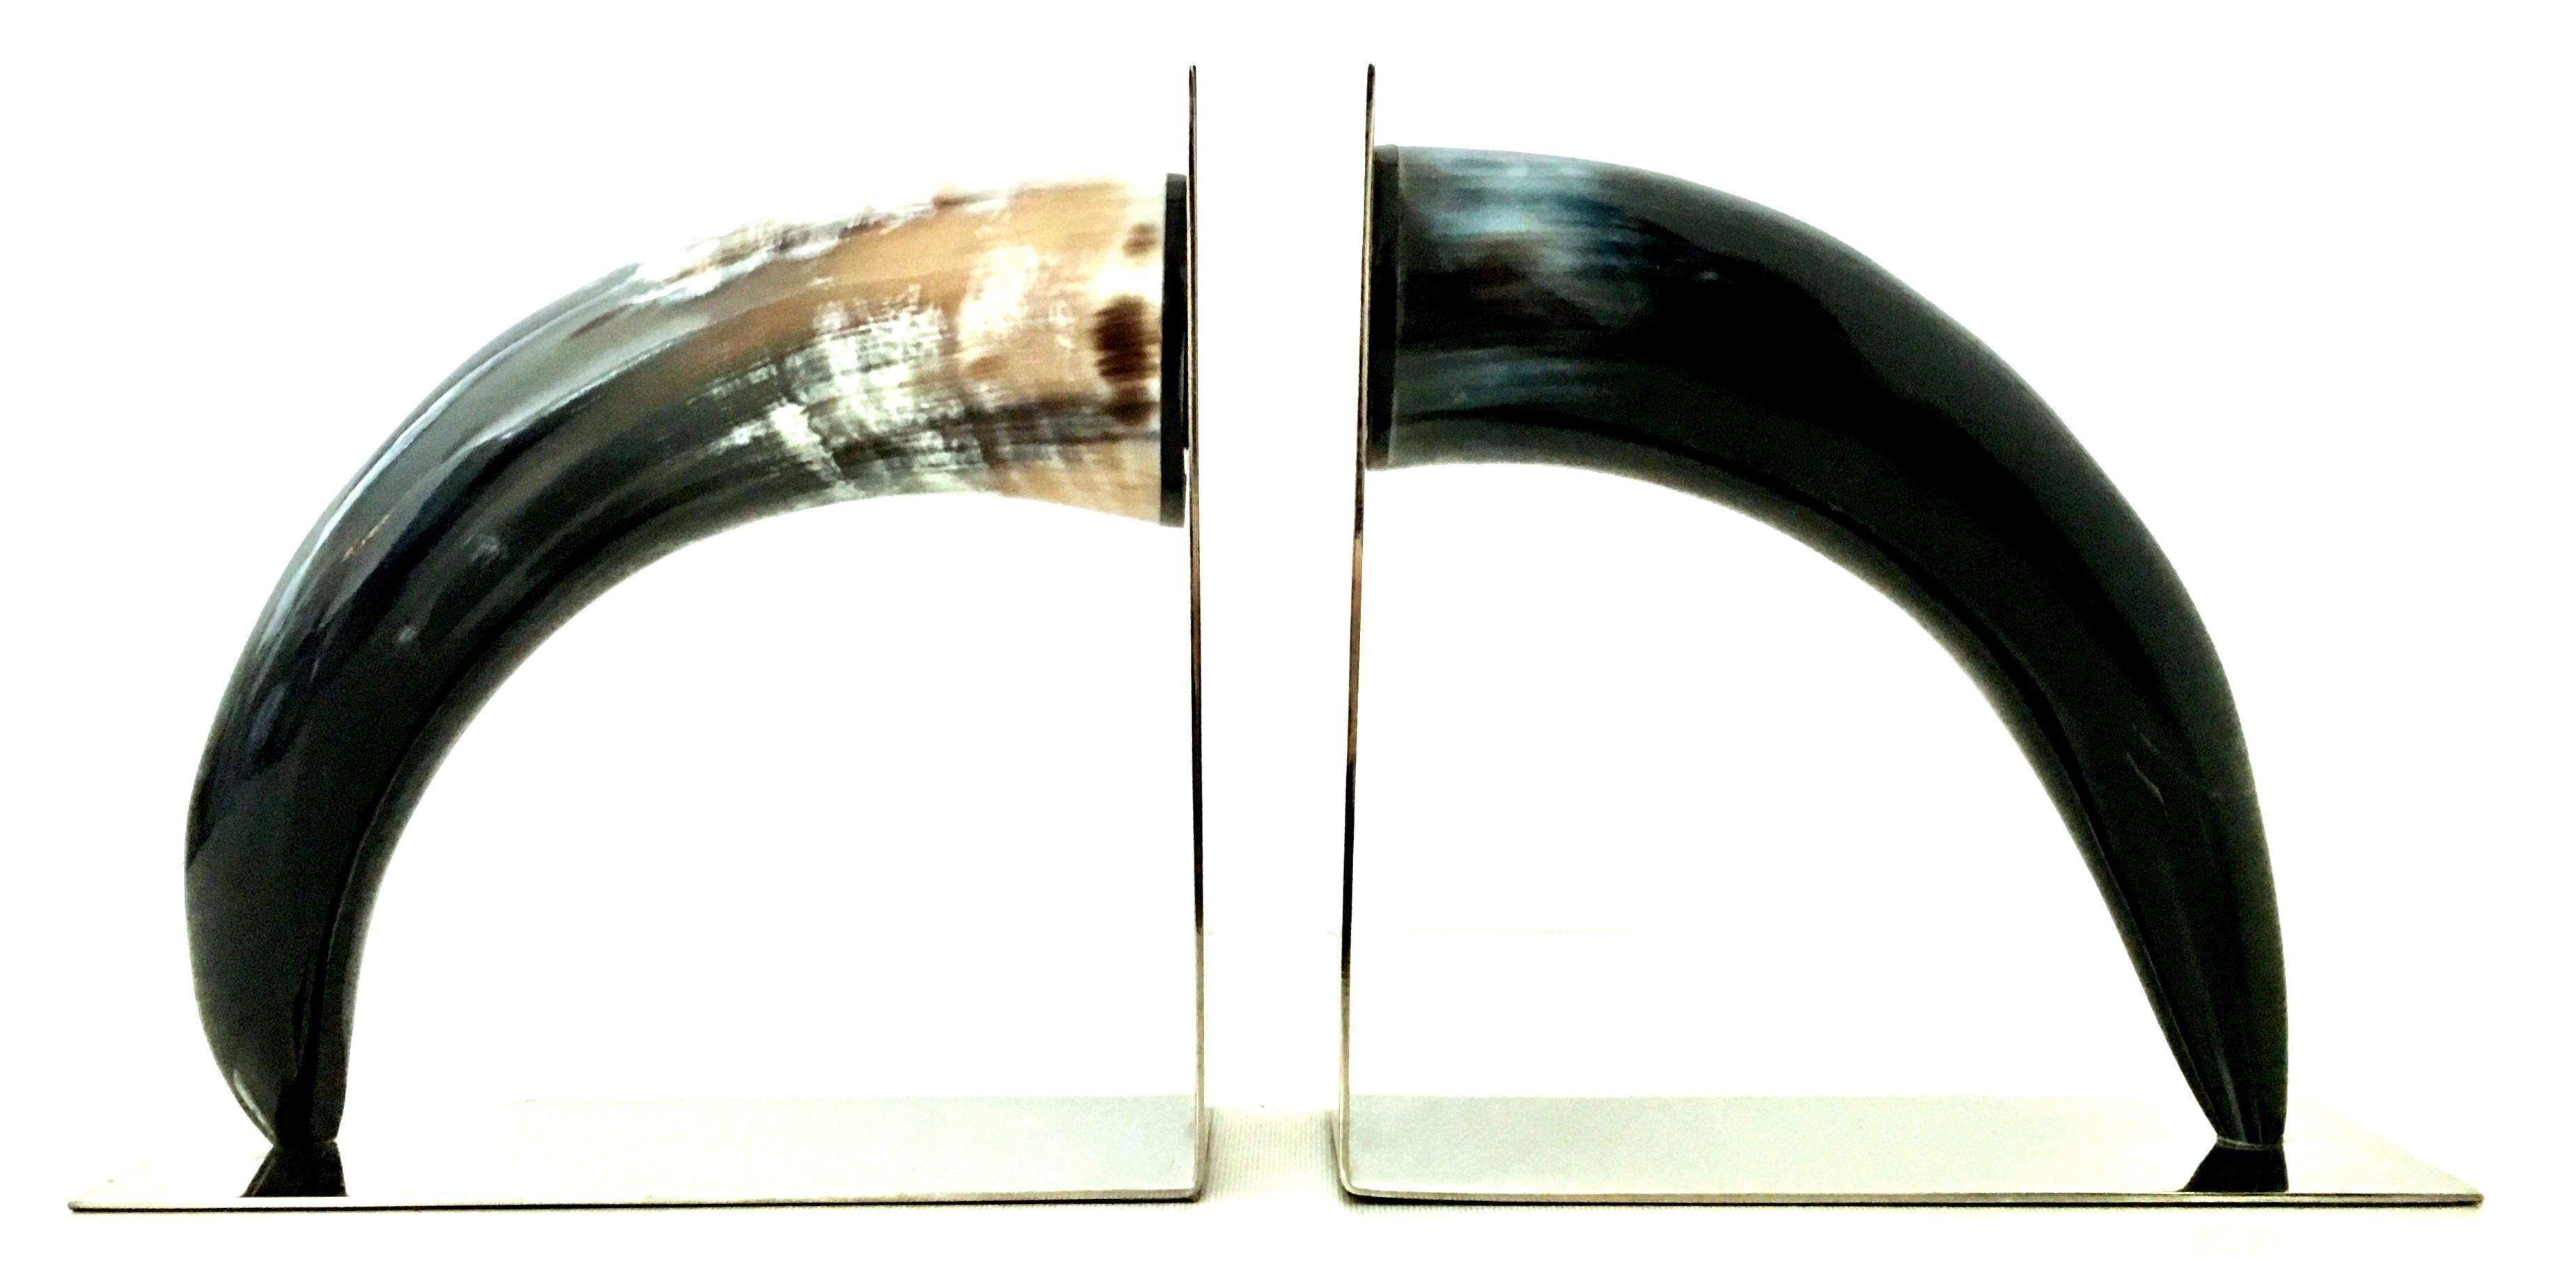 21st Century Pair of Contemporary and sleek polished black natural horn and chrome bookend sculptures. These timeless sculptural horn bookends feature polished black and tan polished buffalo horn mounted on sleek polished chrome book ends.
Each horn